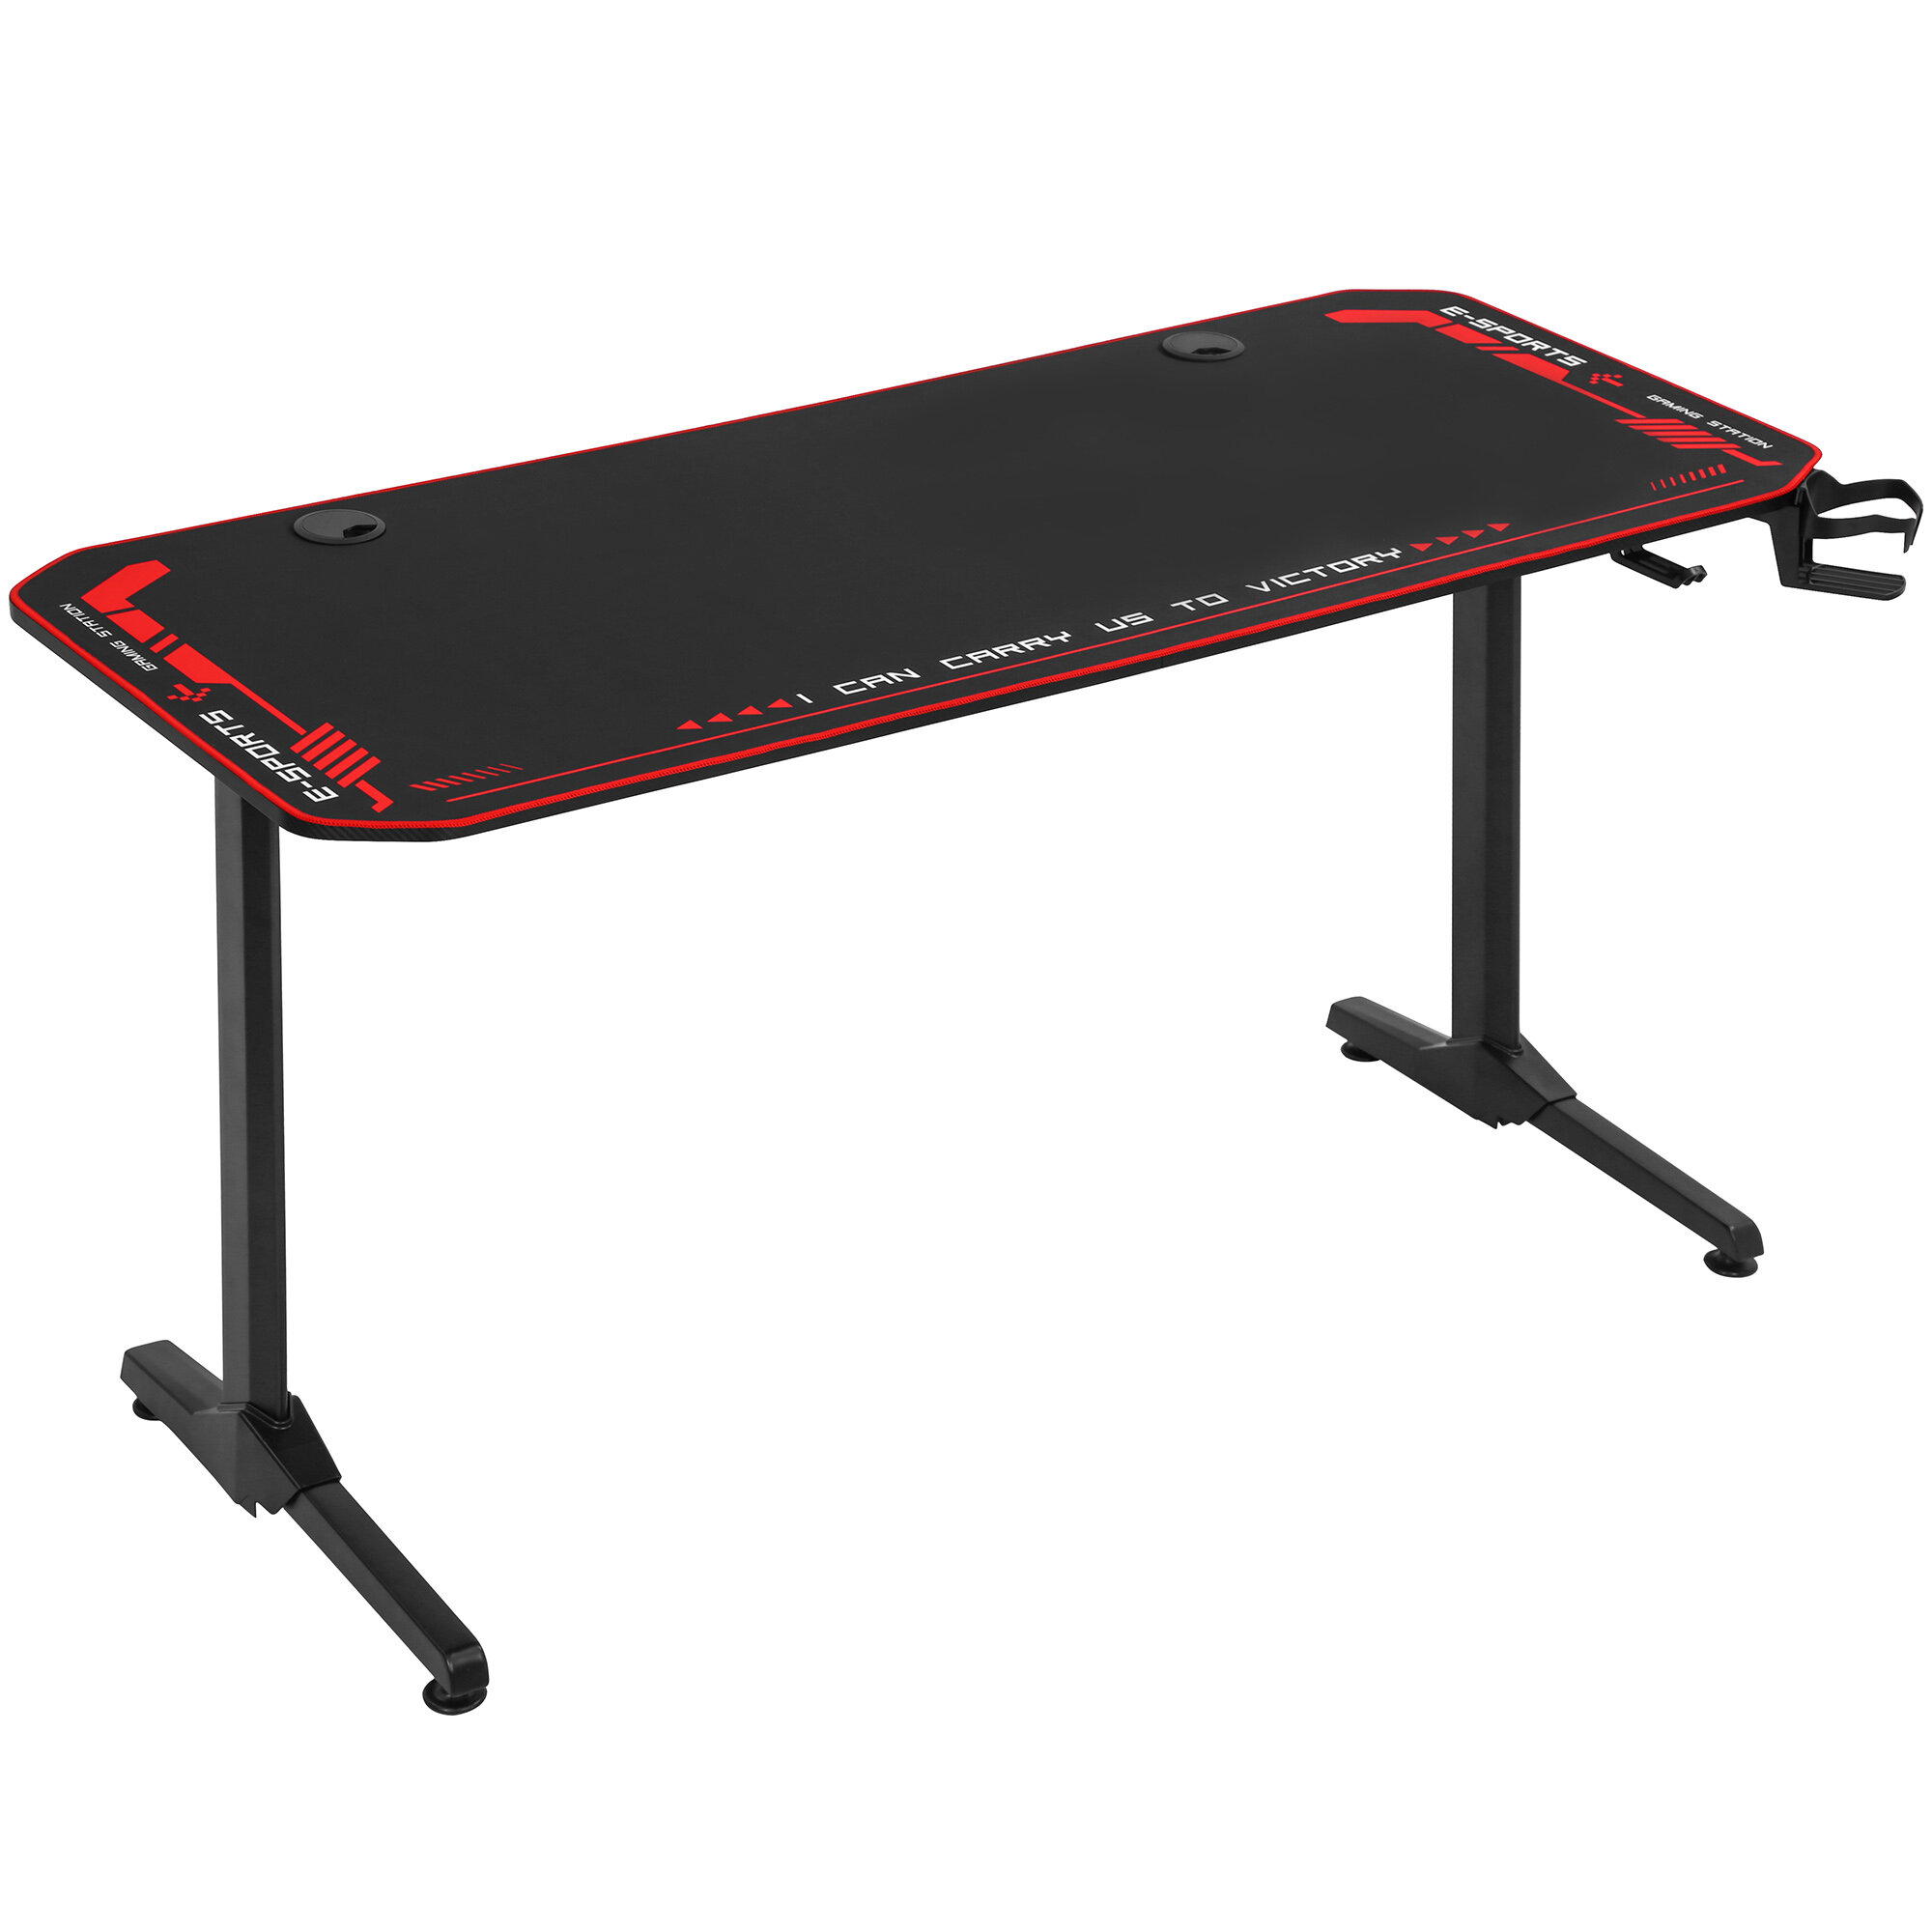  GTRACING 55 Inch Gaming Desk with LED Lights, Computer Gamer  Desk with Monitor Stand, Ergonomic Carbon Fiber Surface Gaming Table with  Power Outlet and Mouse Pad for Home Office, RGB 